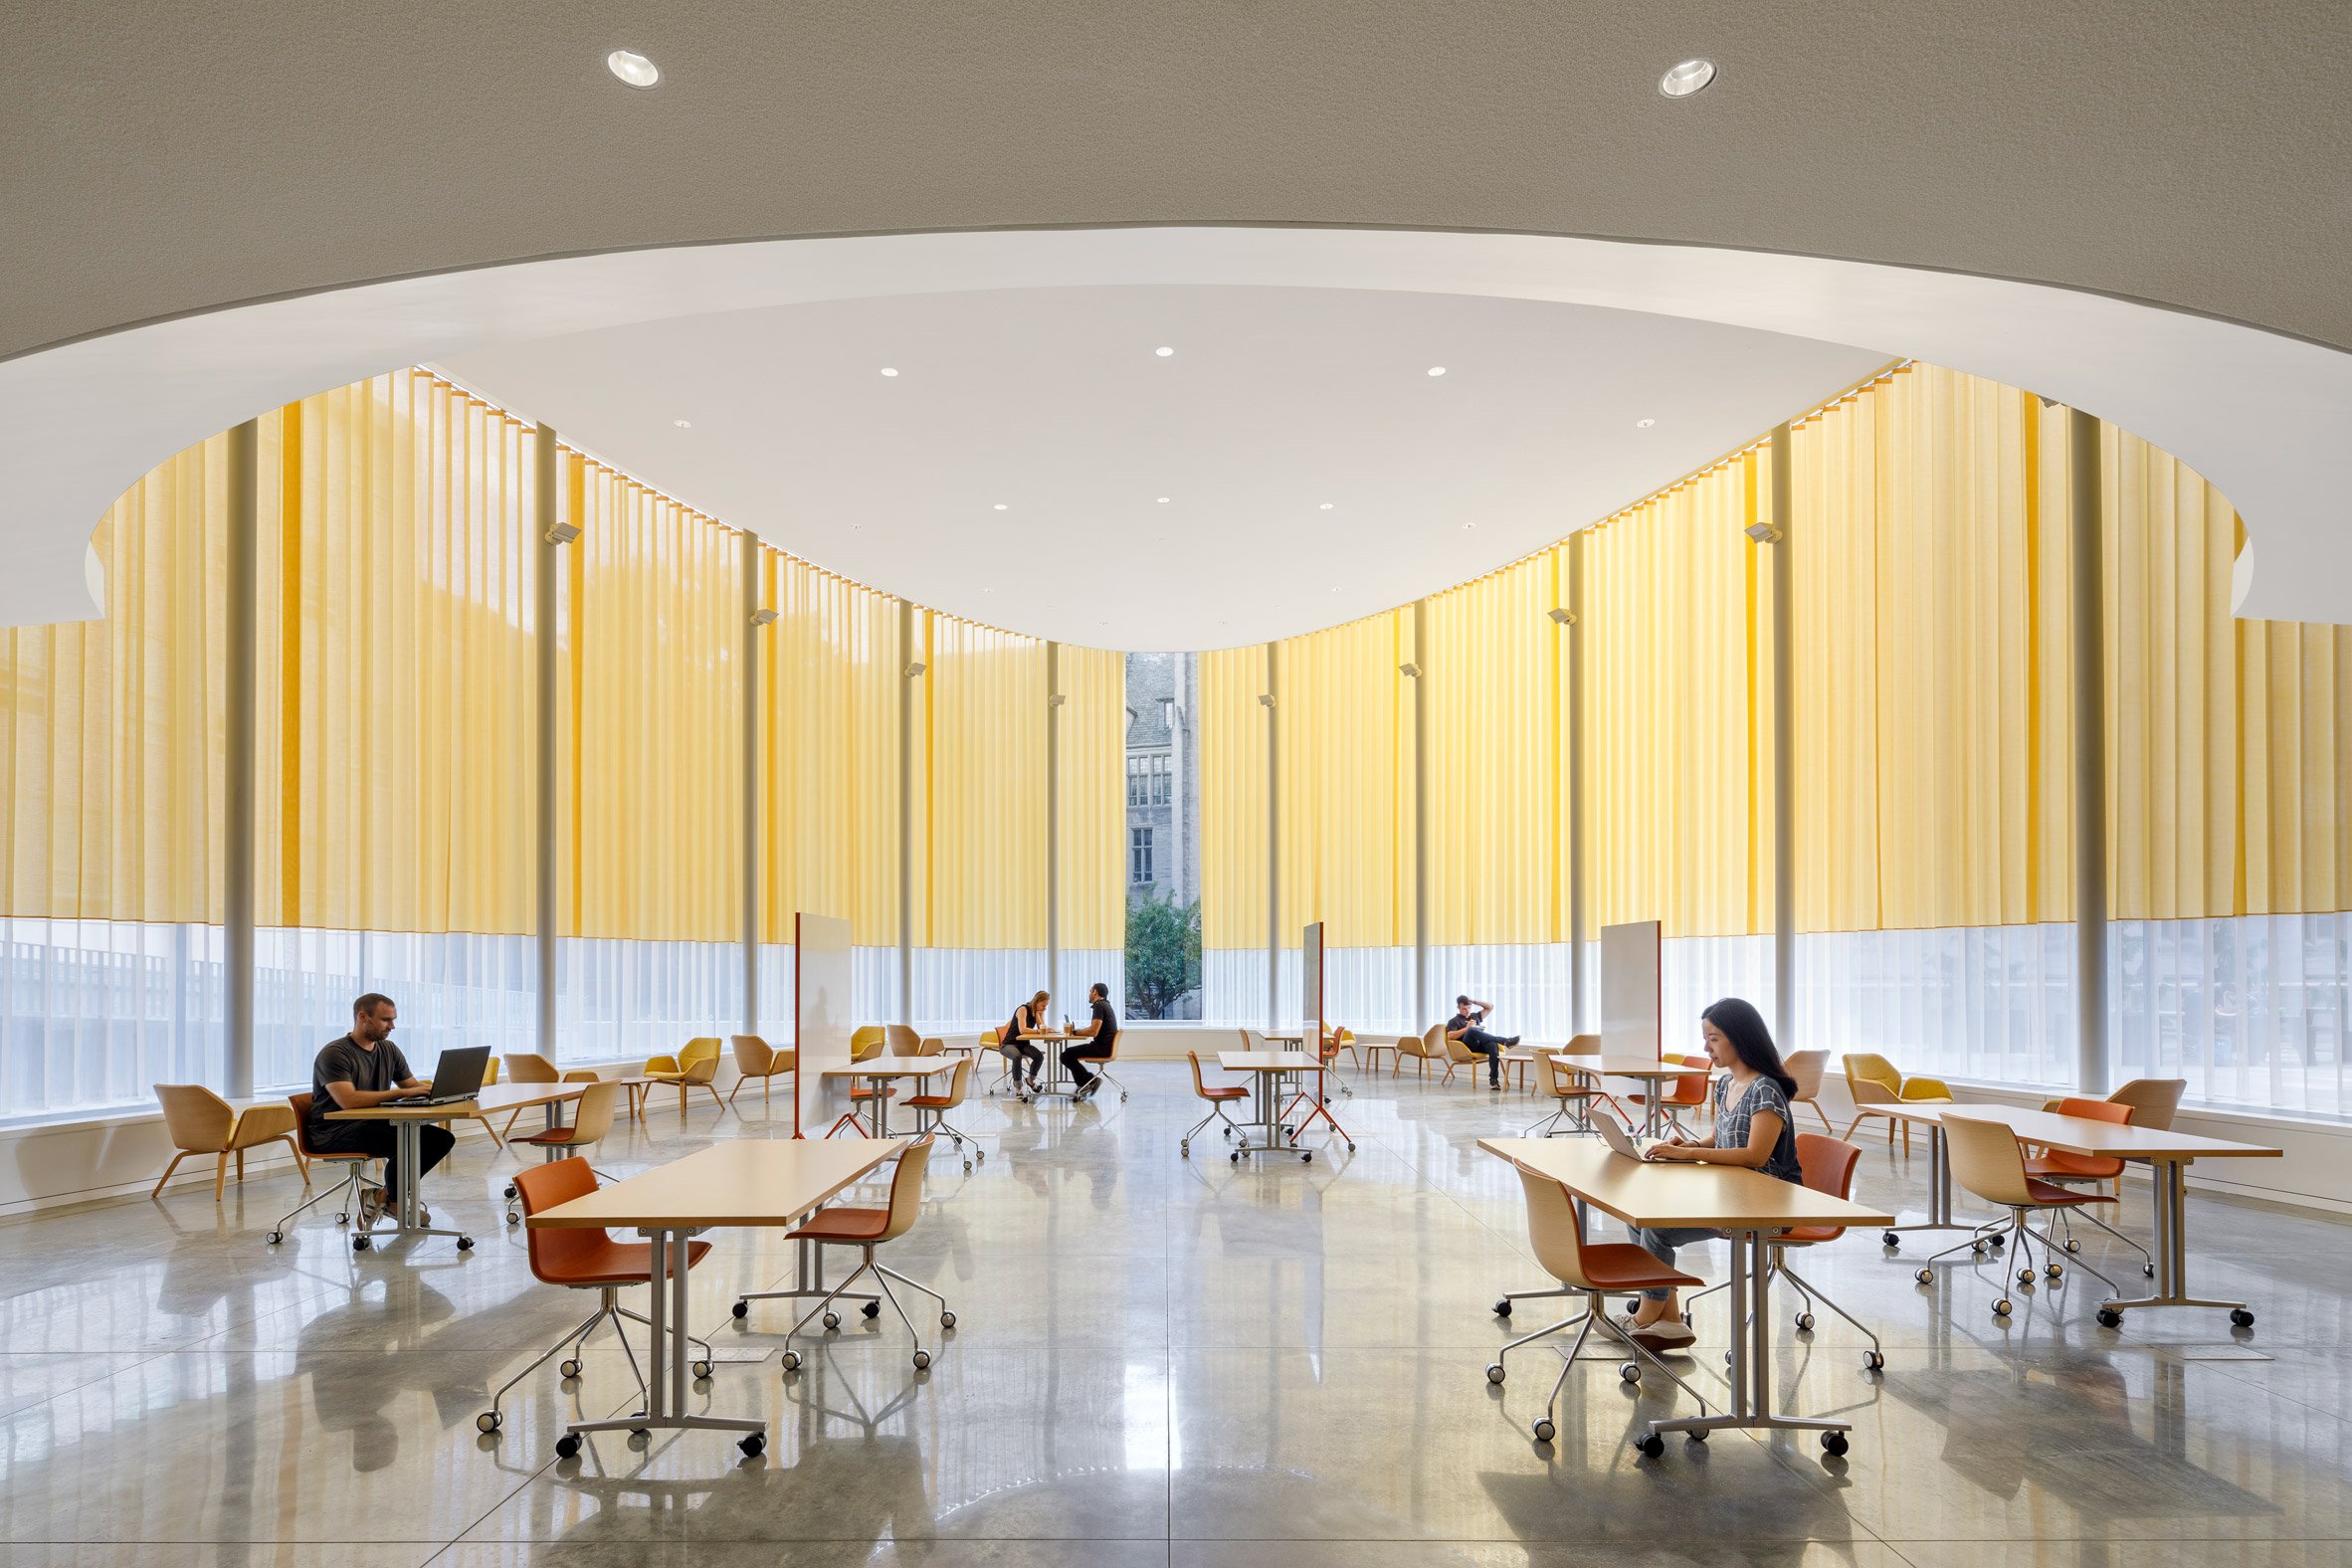 Curtains shade glass walls of pavilion by Weiss/Manfredi